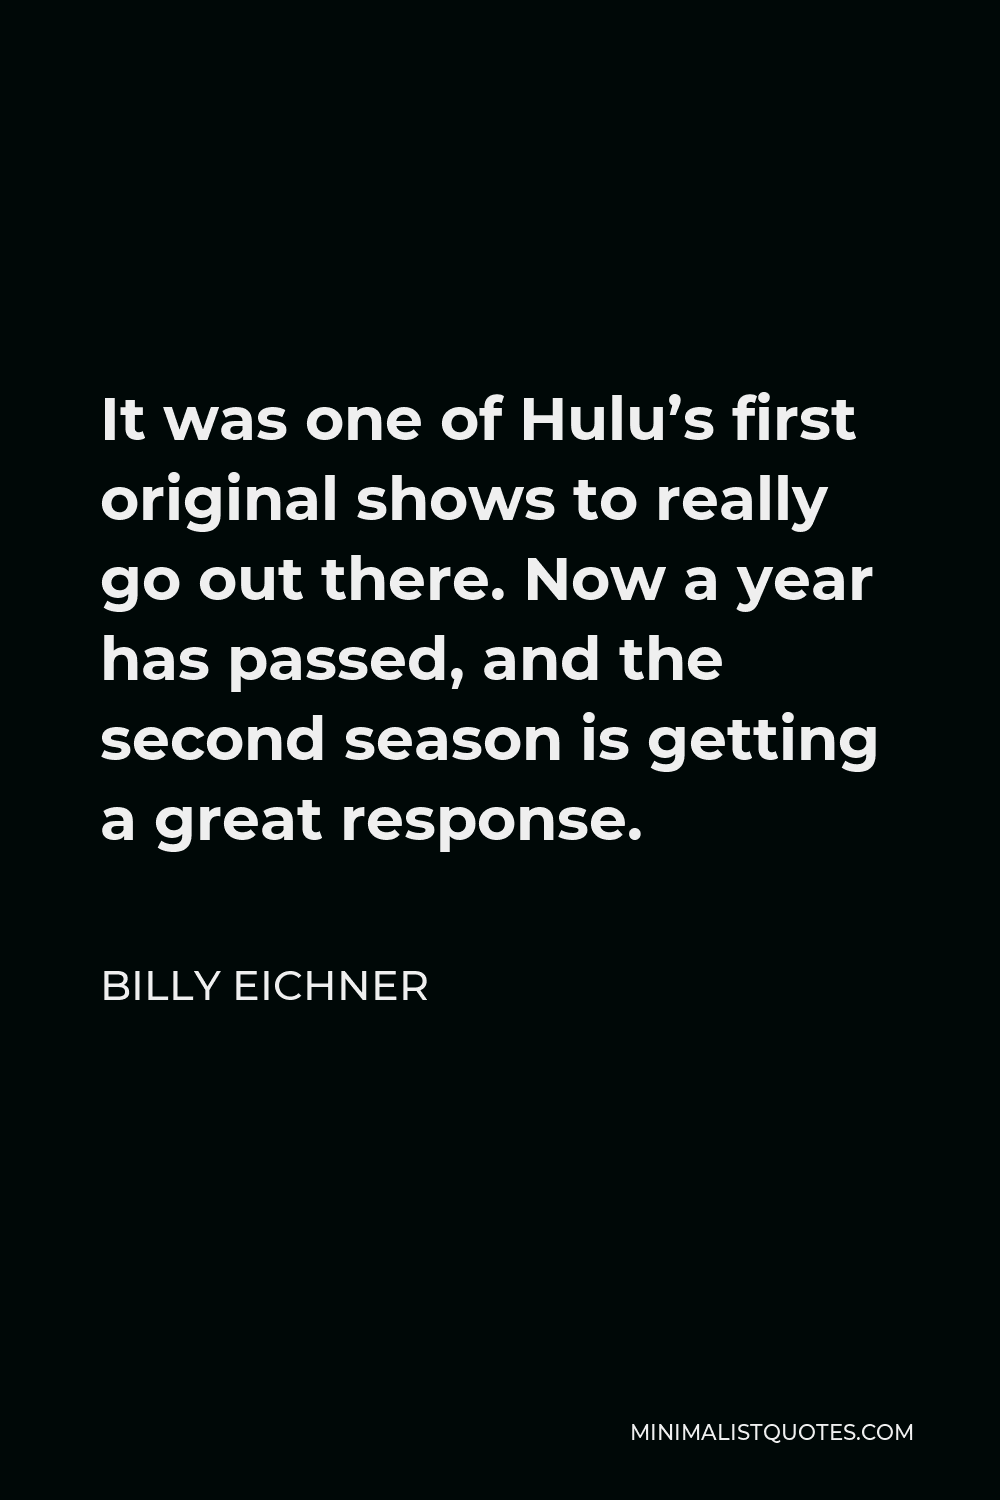 Billy Eichner Quote - It was one of Hulu’s first original shows to really go out there. Now a year has passed, and the second season is getting a great response.